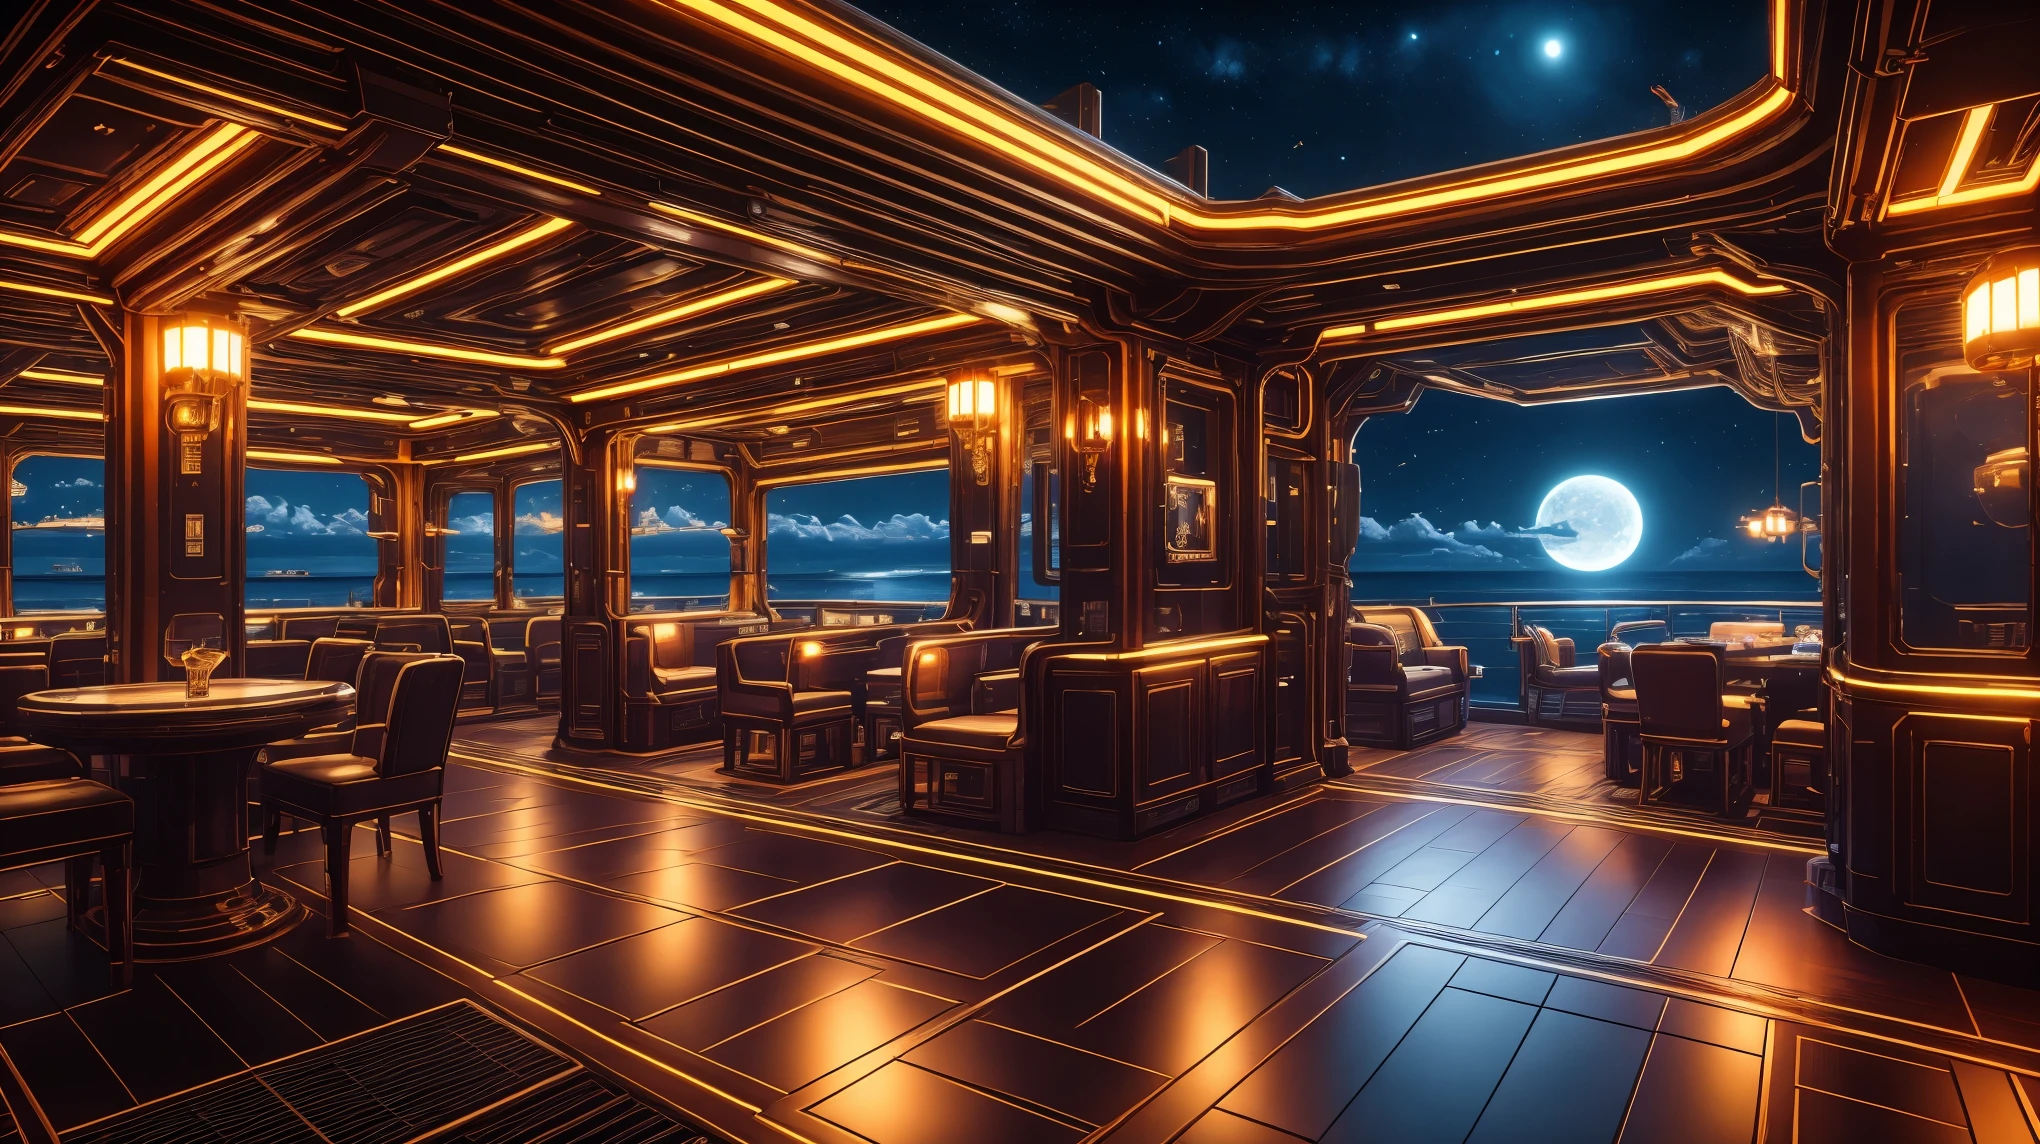 COMG3O，(best quality,4k,8k,highres,masterpiece:1.2),ultra-detailed,(realistic,photorealistic,photo-realistic:1.37),nighttime,dream-like,luxury cruise ship,sparkling lights,glamorous atmosphere,ocean view,starry sky,twinkling stars,
reflection on the water,golden moonlight,gentle waves,majestic ship structure,elegant architecture,illuminated deck,passengers enjoying the night,beautifully dressed men and women,dancing under the moonlight,live music filling the air,breathtaking fireworks display,romantic ambiance,exquisite cuisine and drinks,enchanting decorations,meticulously crafted interior design,lavish ballroom,blissful celebrations,captivating entertainment,unforgettable memories,tranquil and serene,hint of mystery,magical journey,endless possibilities.